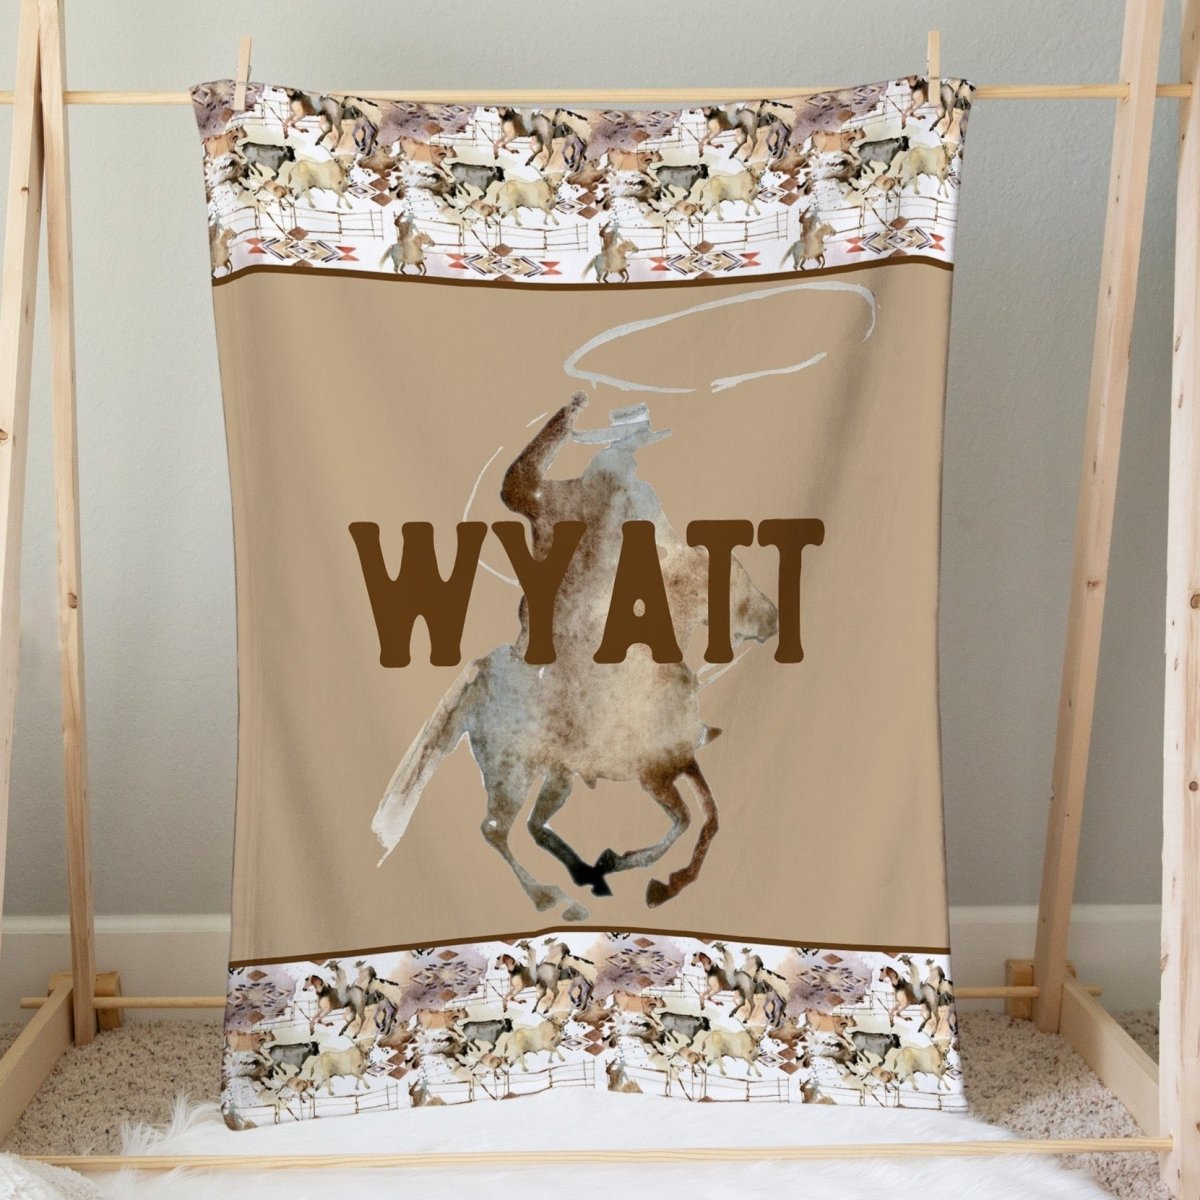 Wild West Cowboy Personalized Minky Blanket - gender_boy, Personalized_Yes, text